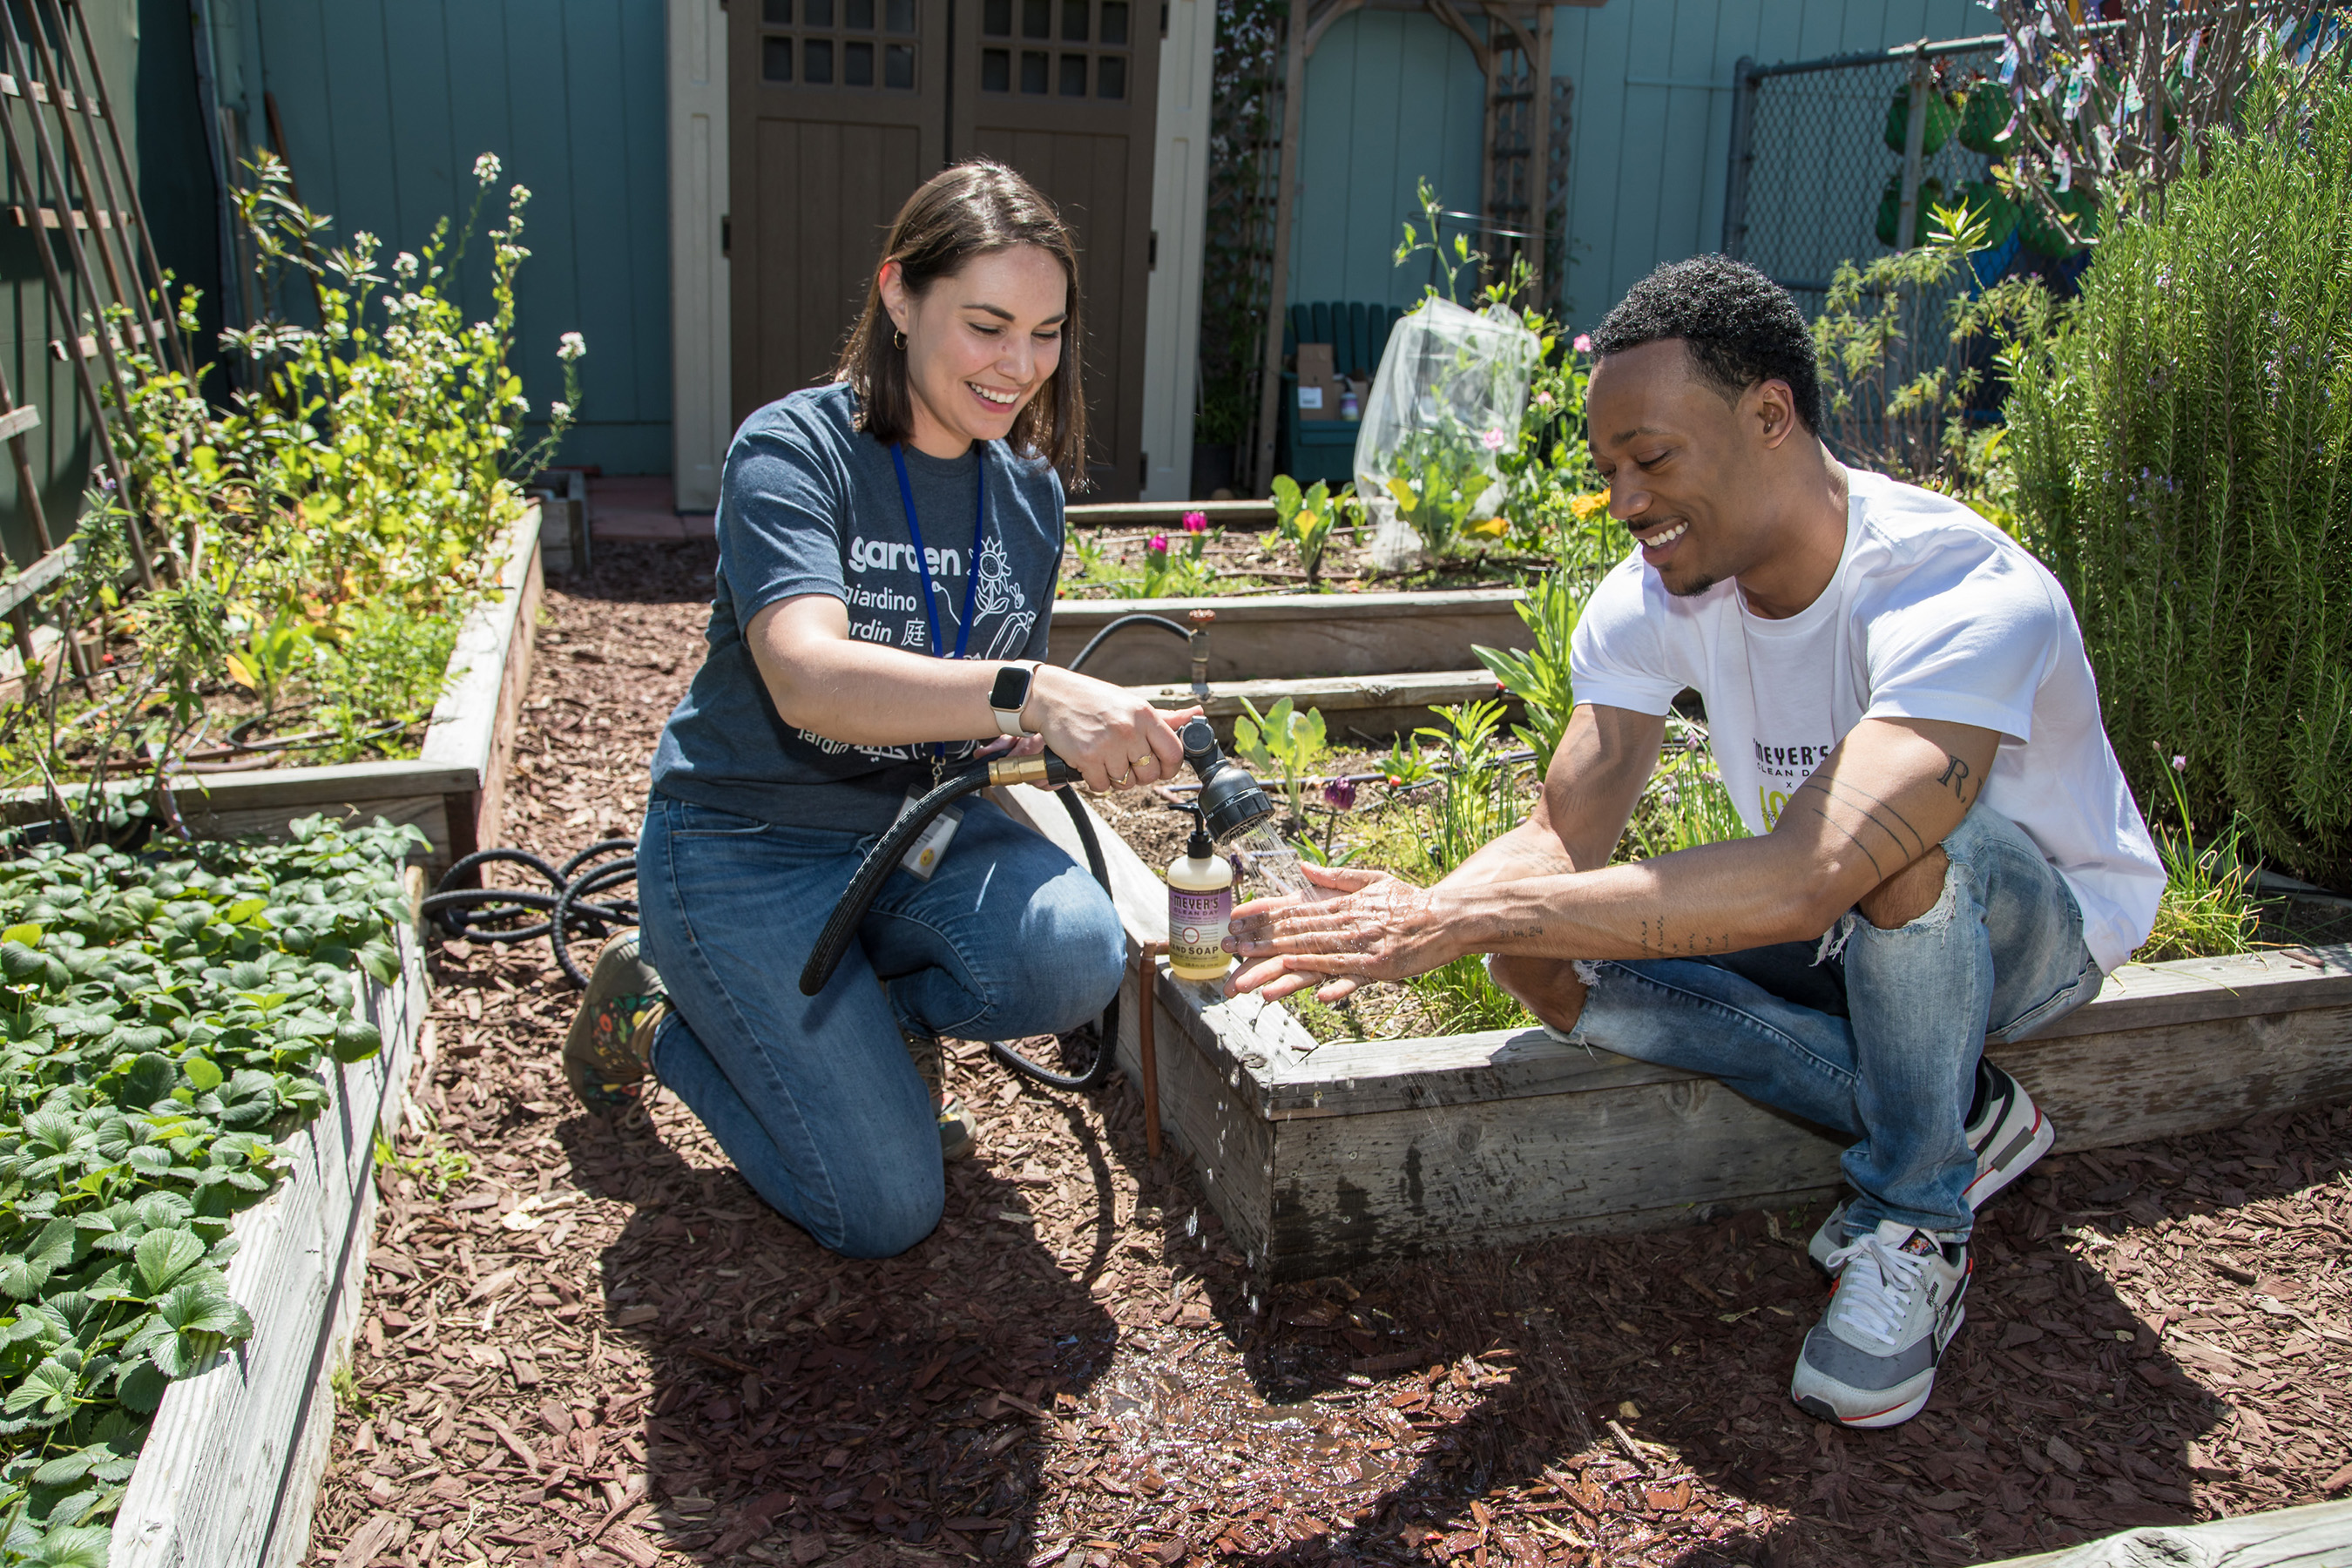 Tyler James Williams washing up with Mrs. Meyer’s Clean Day’s fan favorite Compassion Flower Hand Soap after working in the garden on National Gardening Day.